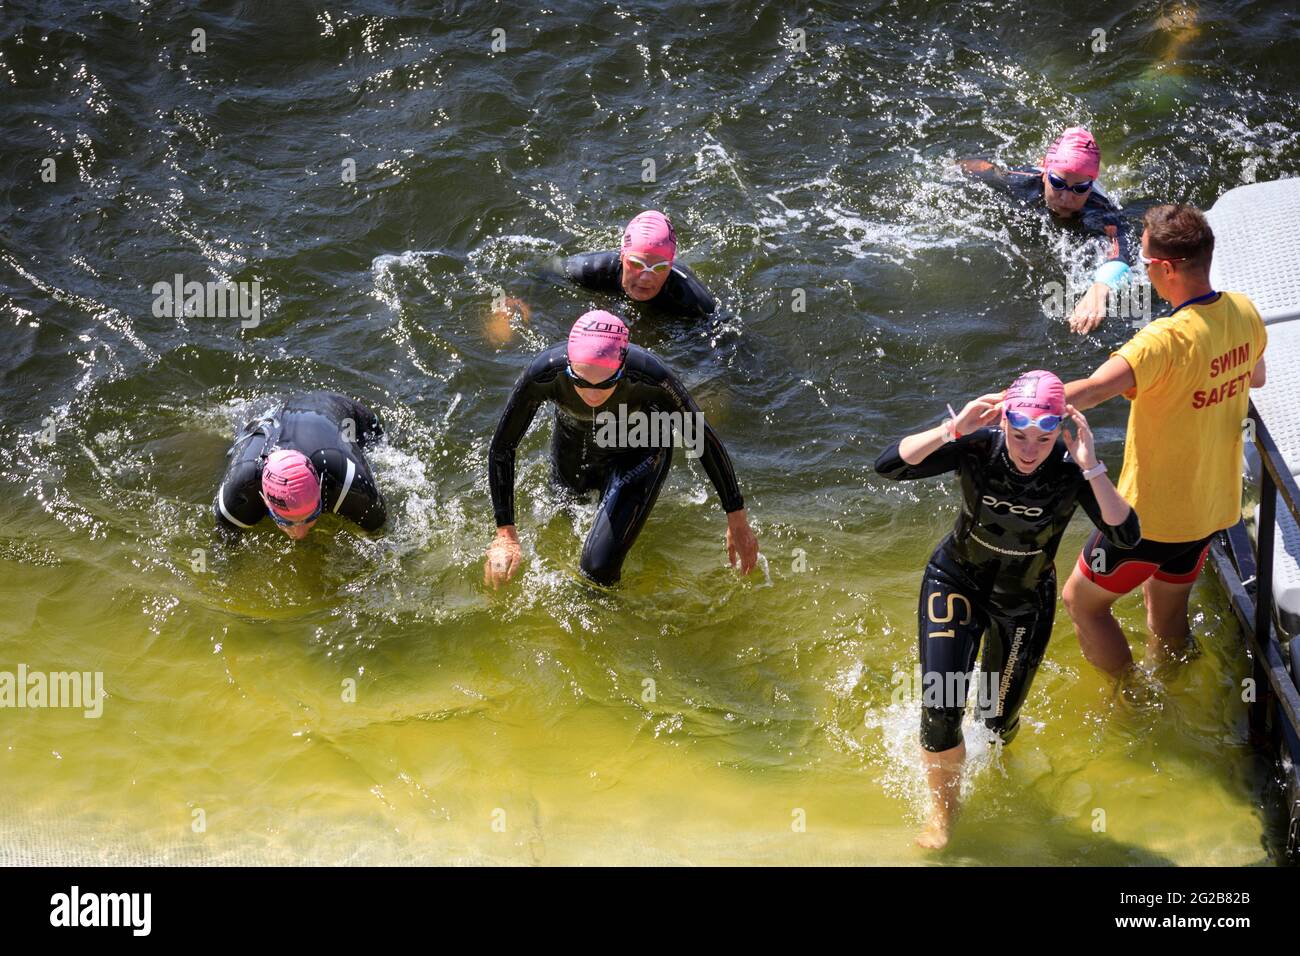 Swimmers get out of the water at the AJ Bell London Triathlon 2018, London, UK Stock Photo